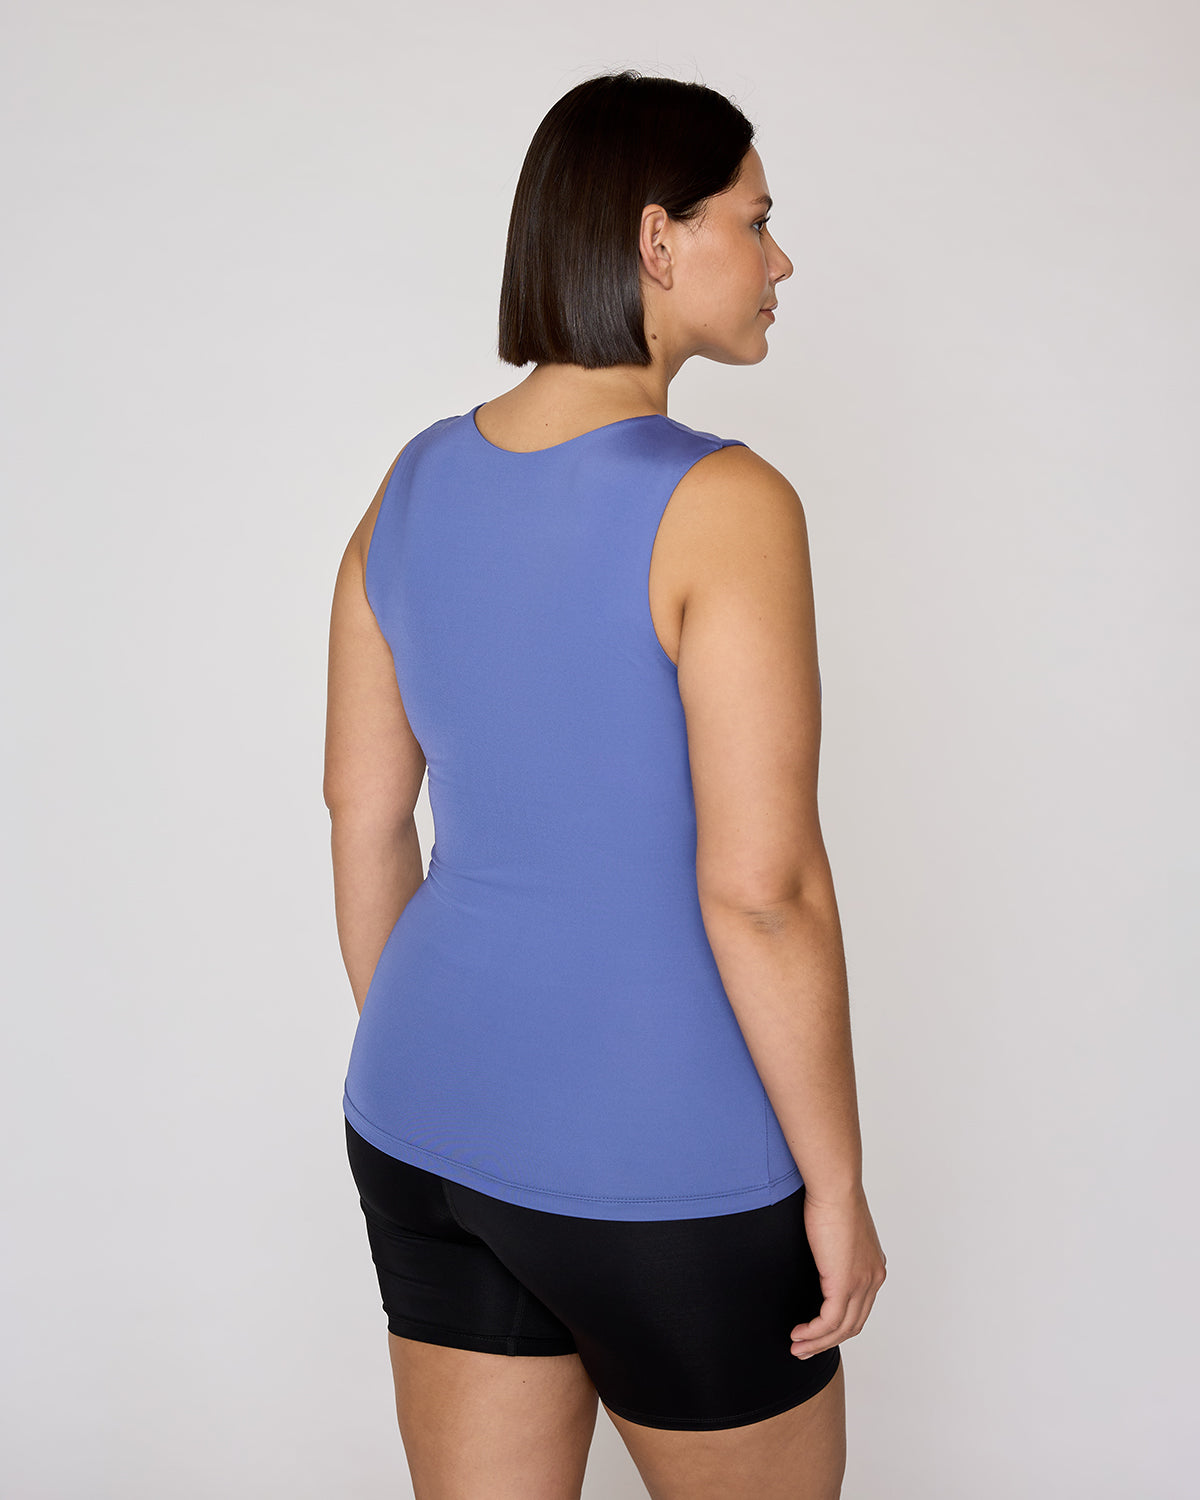 "#color_Coastal Blue|Maya is 5'7" and wears a size L